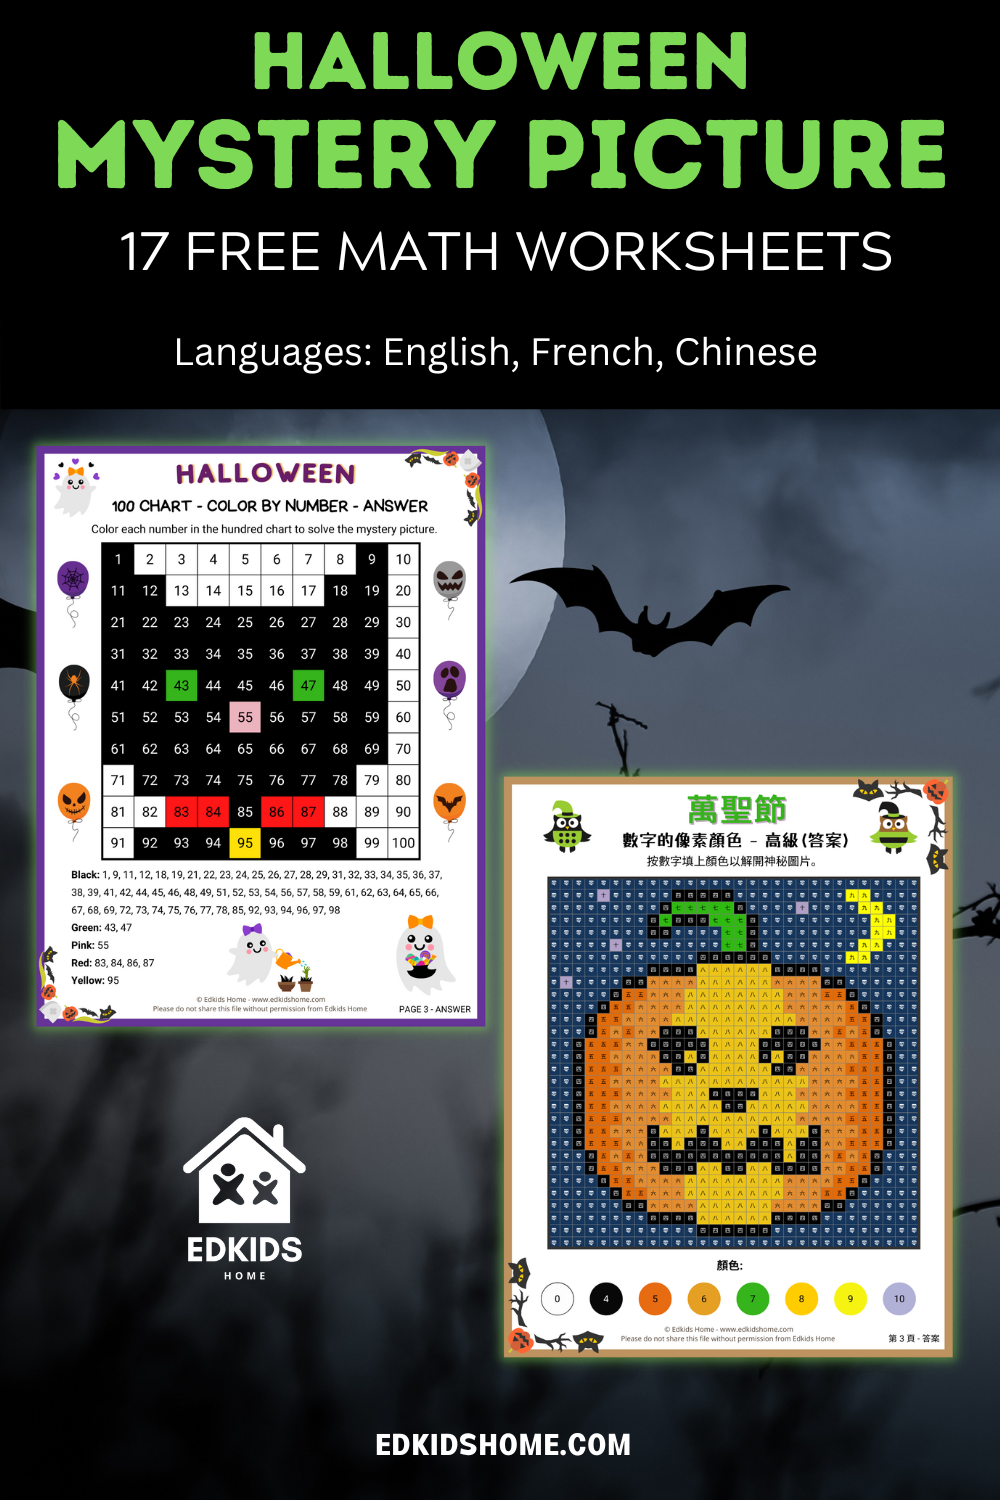 Halloween Mystery Picture - 17 Free Math worksheets available in English, French, Chinese